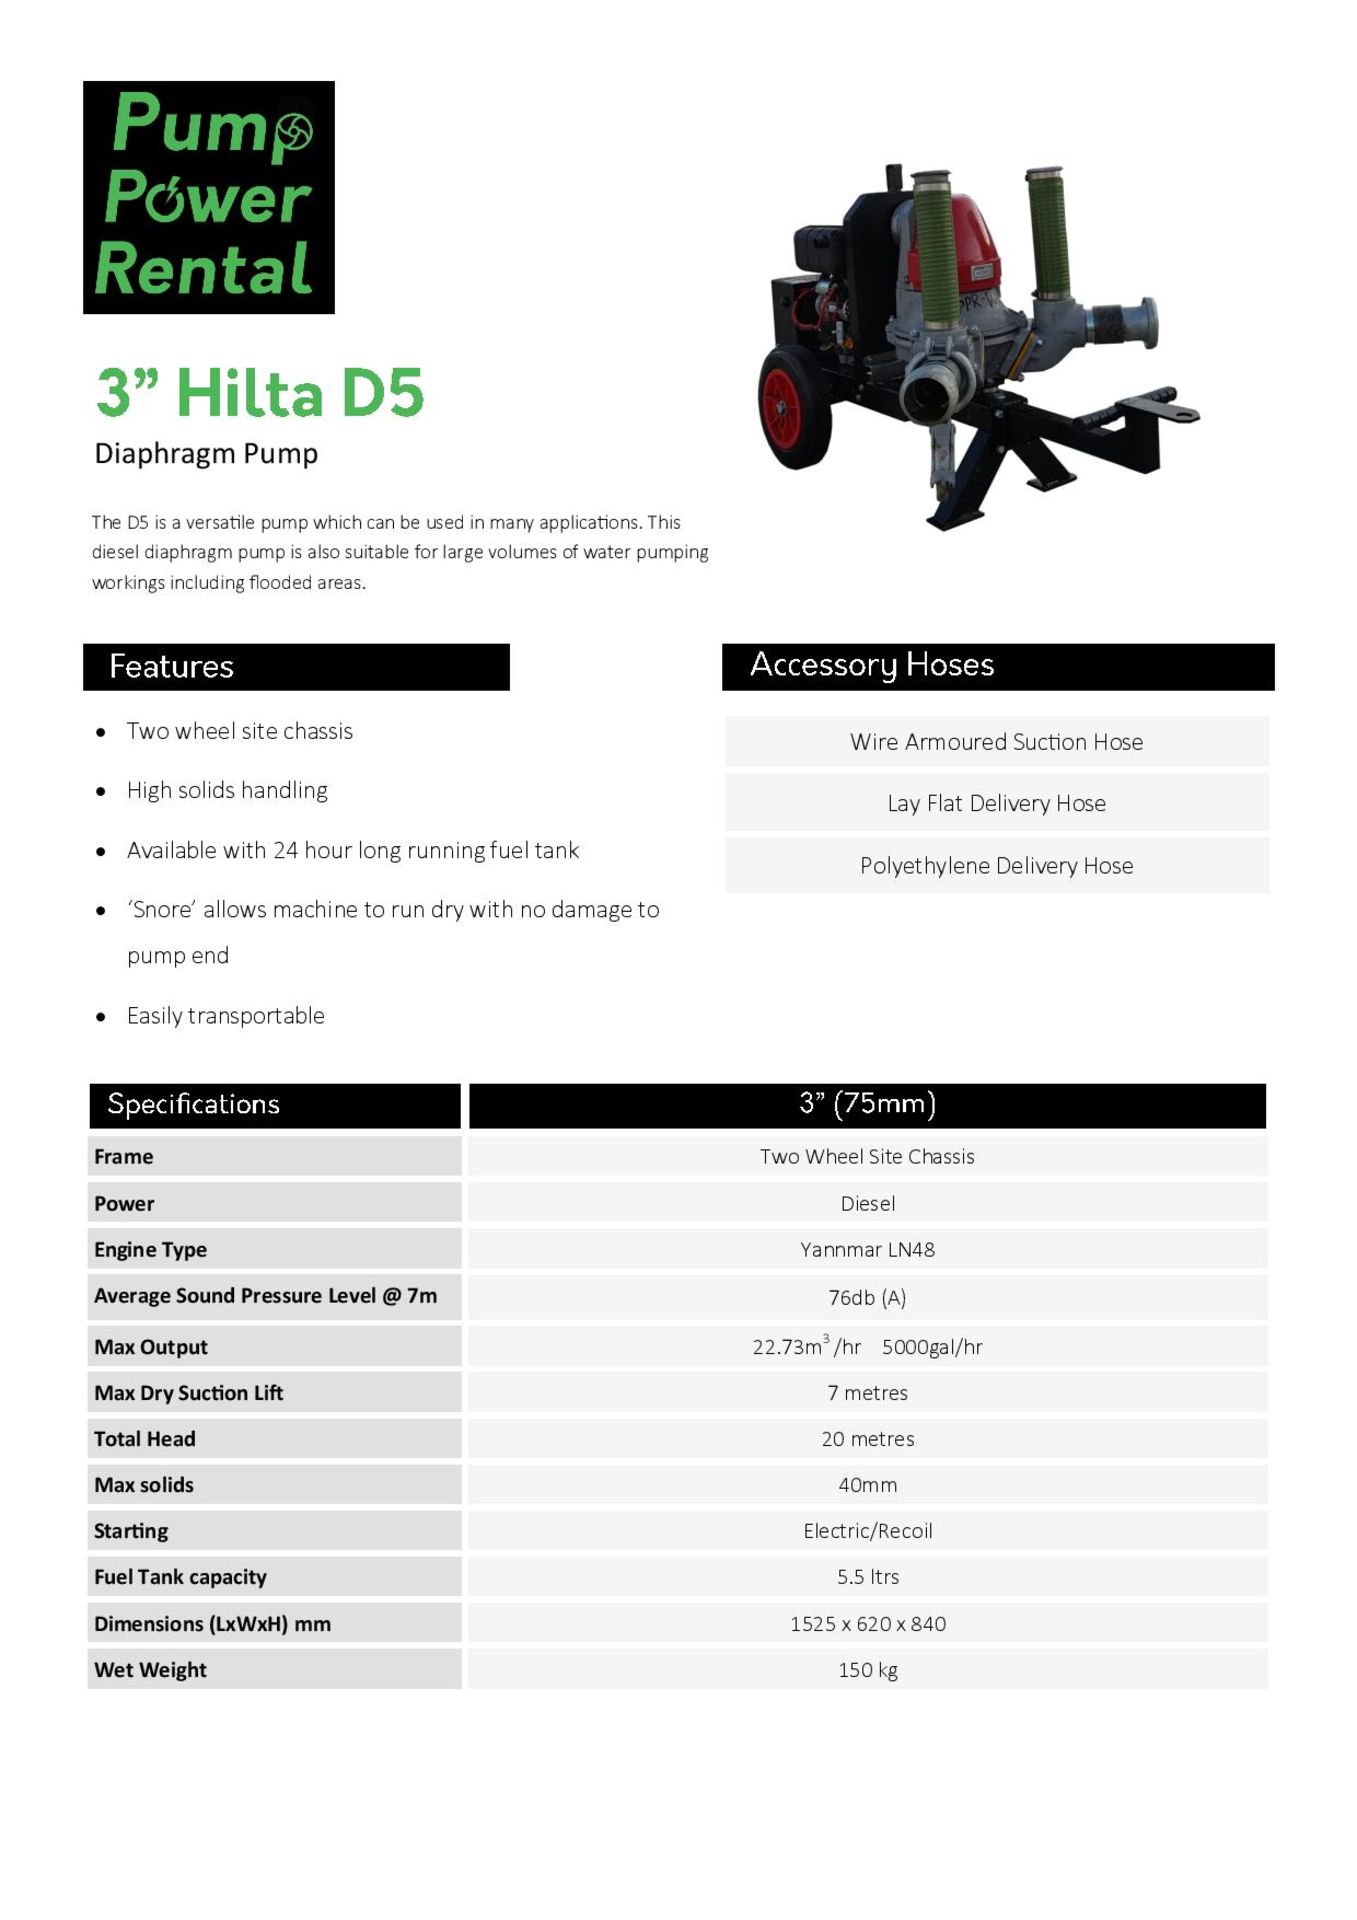 Hilta Proflow D5 3"" Diesel Diaphragm Pump w/ Wheeled Site Chassis | YOM: 2017 | A074 - Image 7 of 7